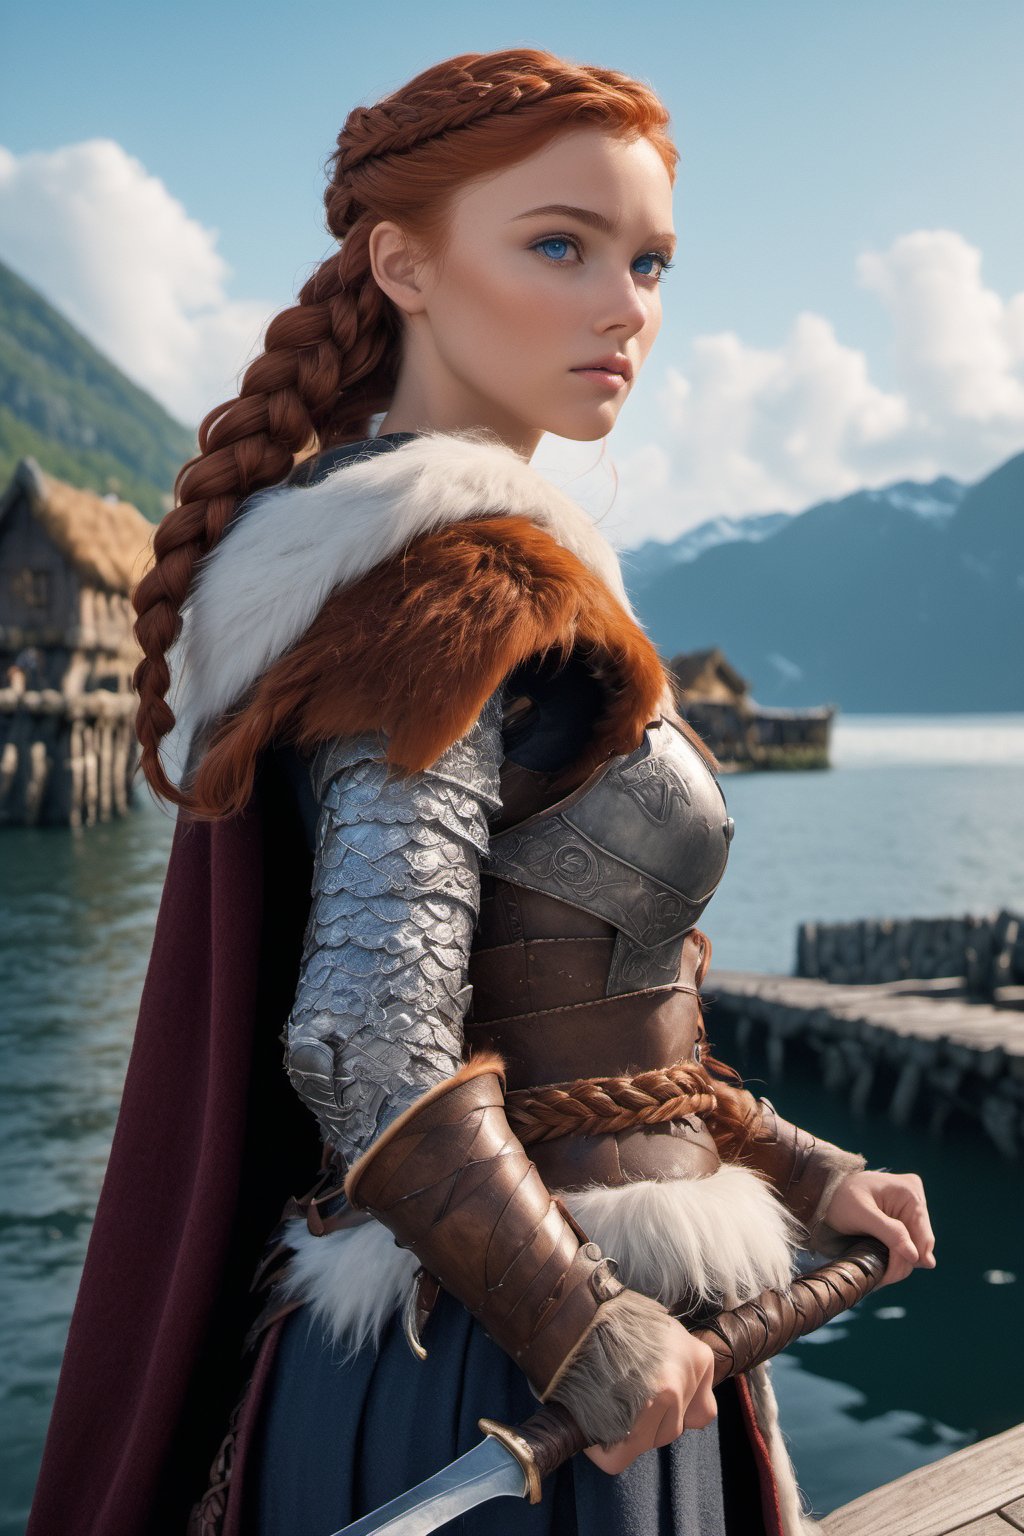 (best quality, UHD, 16K, masterpiece, (photorealistic:1.2), soft light, perfect texture, high quality),
looking at viewer, 
1girl, (Valkyrie:0.8), redhead, (braided braid:1.1), blue eyes,  

fur cape, holds weapon, armor, lace skirt, stands in the harbor, on the jetty, (langbot:1.4)

((Background: fjord, middle ages, viking houses)),